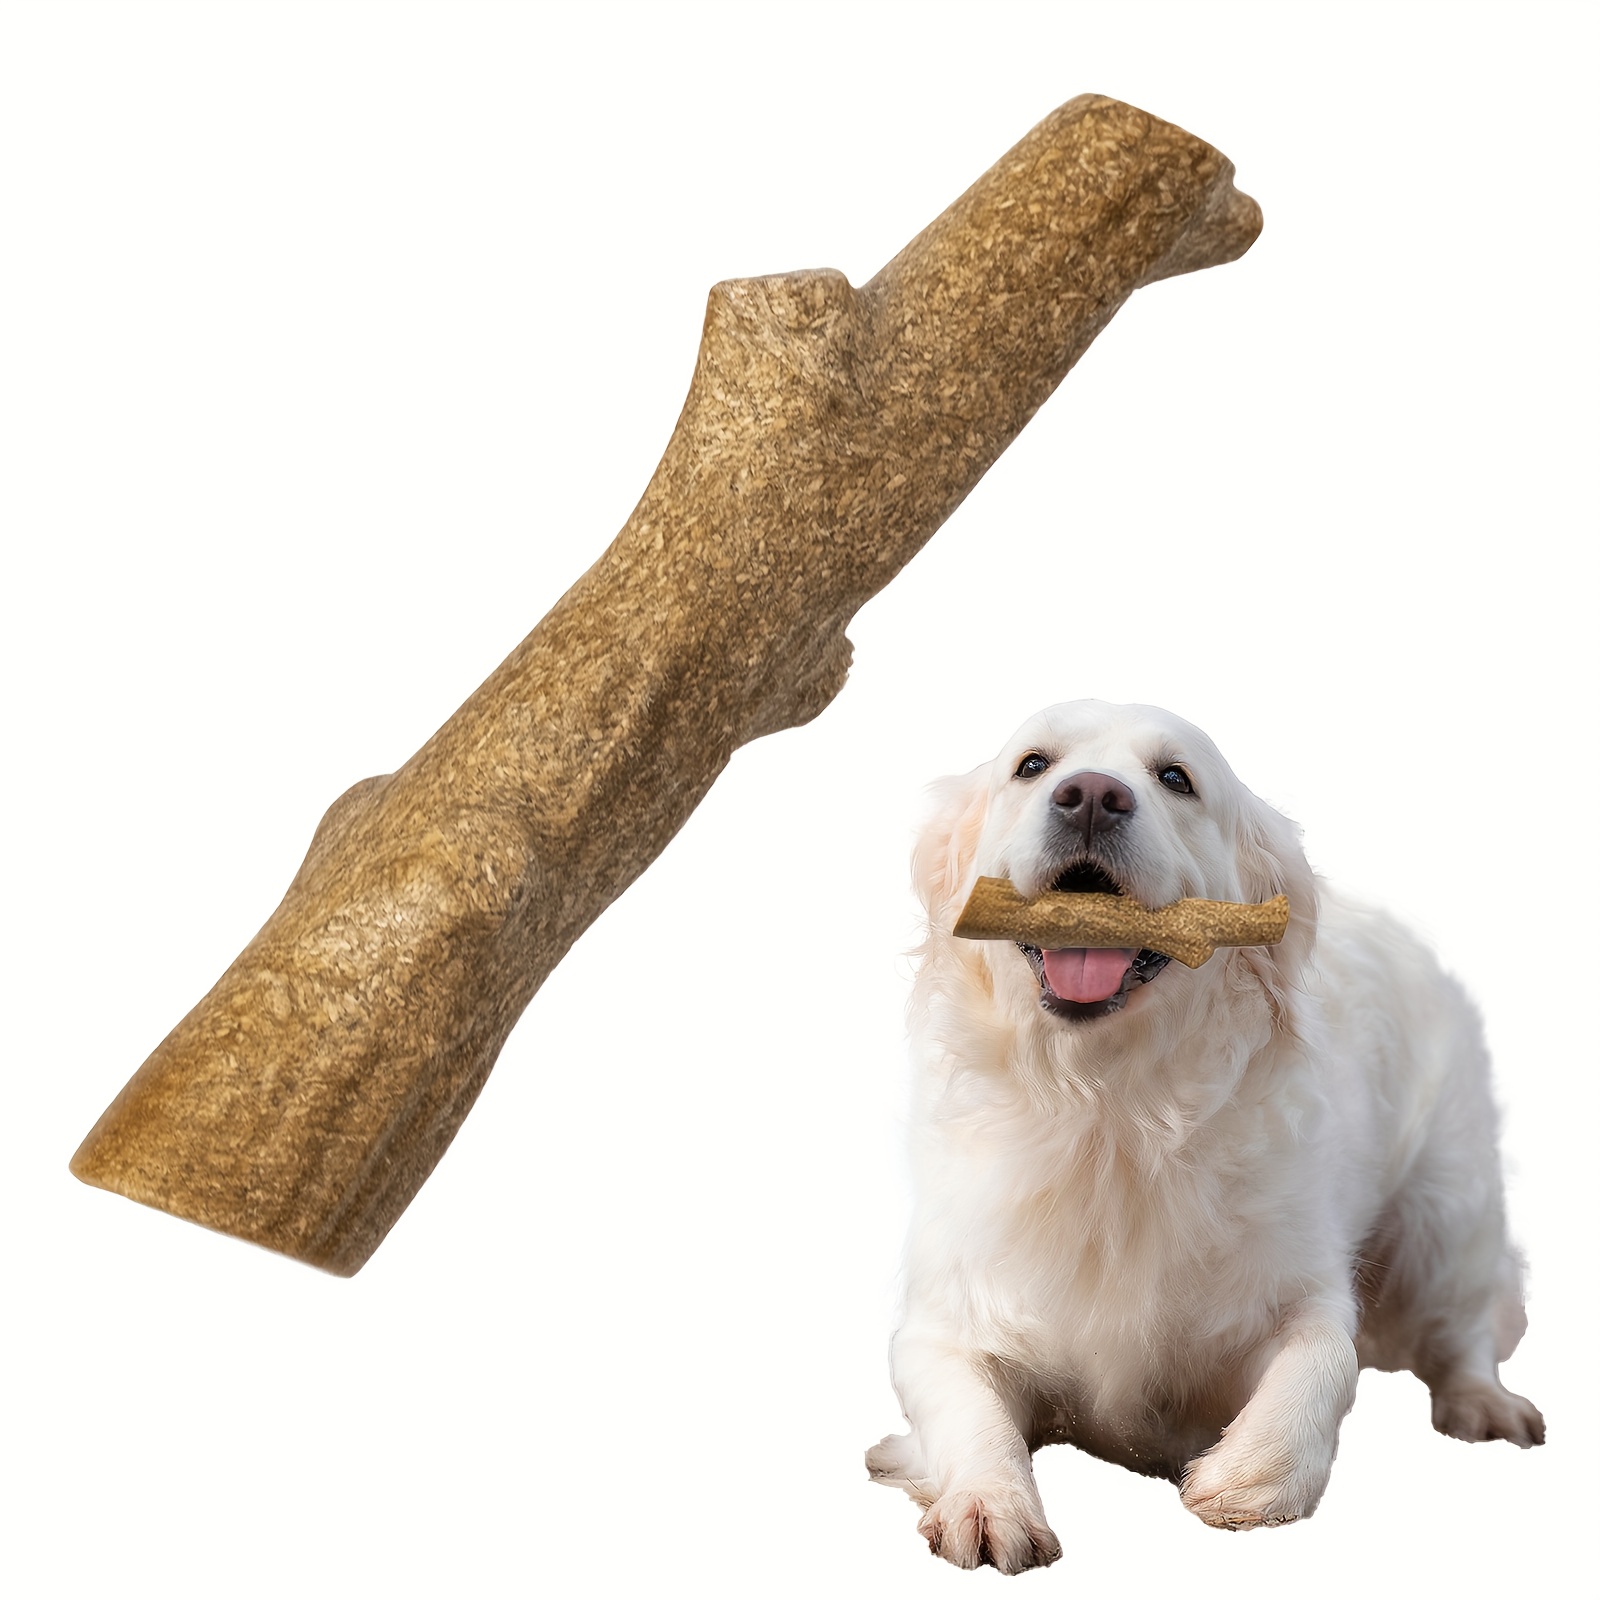 

Dog Durable Chew Toy, Branch Shaped Dog Interactive Play Toy, Teeth Cleaning Training Toy Pet Supplies